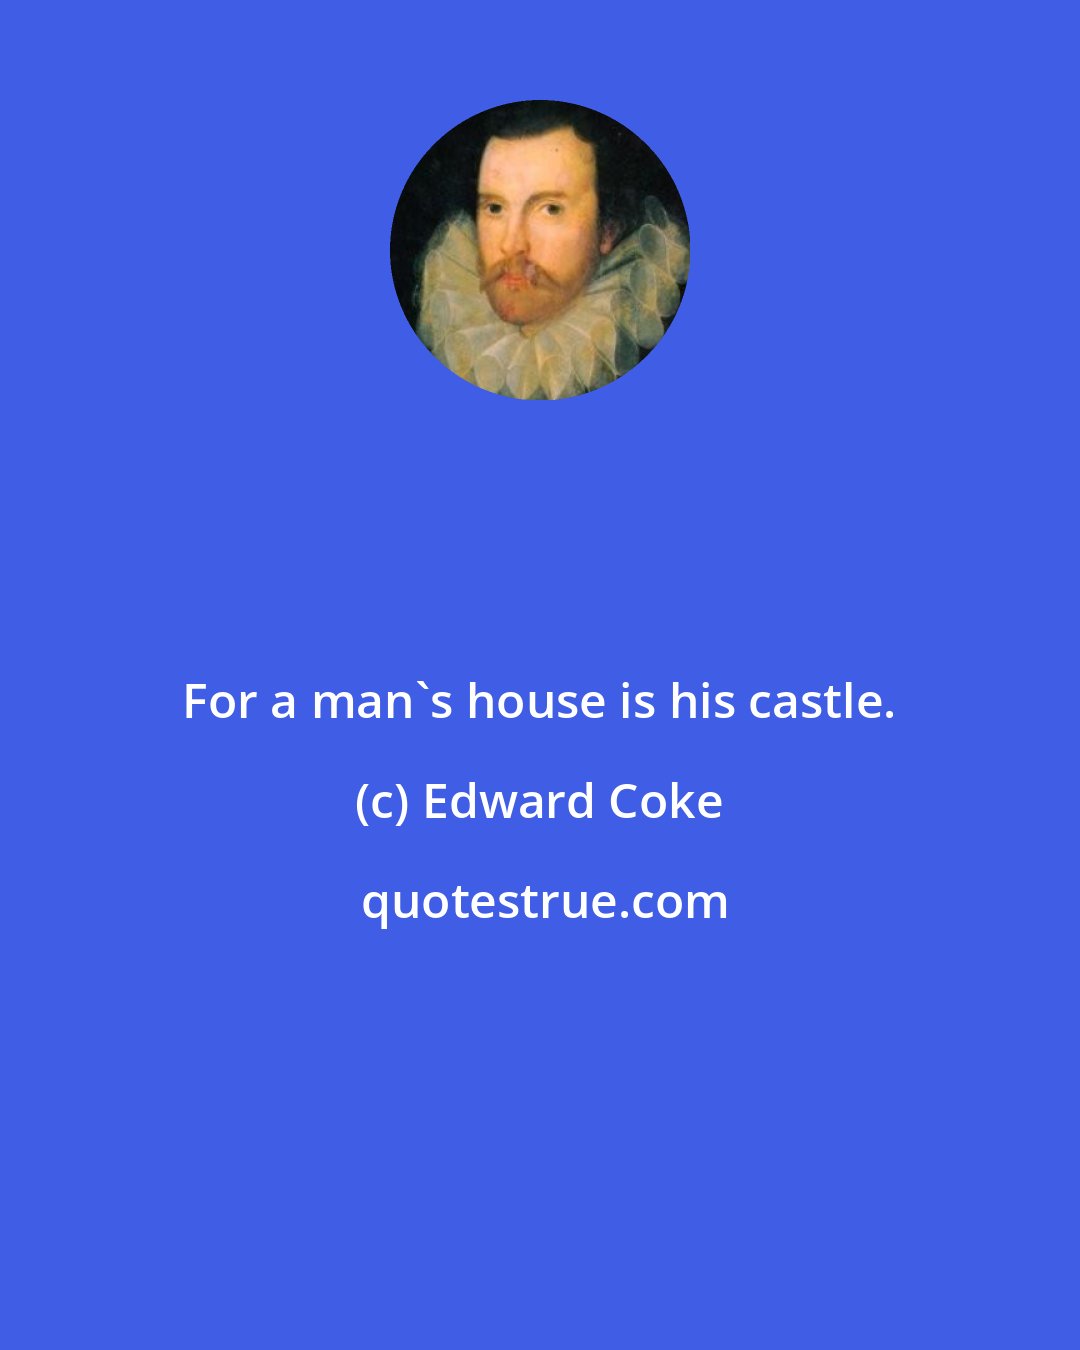 Edward Coke: For a man's house is his castle.